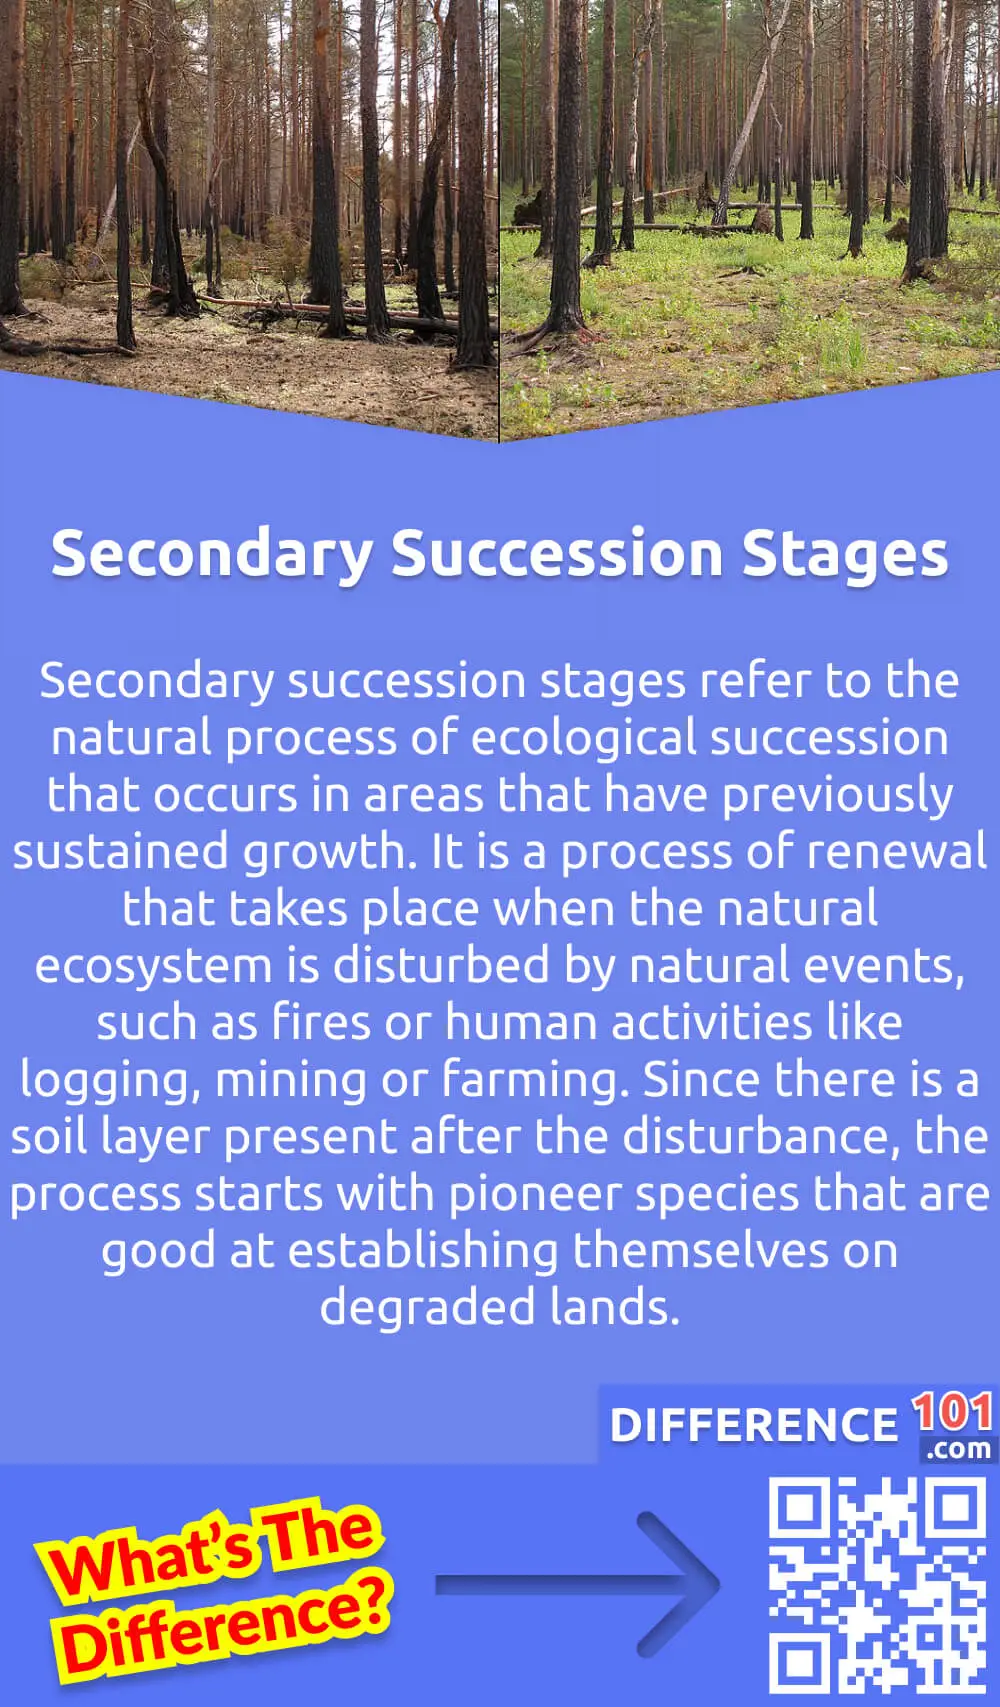 What Is Secondary Succession Stages? Secondary succession stages refer to the natural process of ecological succession that occurs in areas that have previously sustained growth. It is a process of renewal that takes place when the natural ecosystem is disturbed by natural events, such as fires or human activities like logging, mining or farming. Since there is a soil layer present after the disturbance, the process starts with pioneer species that are good at establishing themselves on degraded lands. As they grow and recreate the soil layer, other plant species take root, creating a new community structure. The process continues in the same pattern until the ecosystem reaches a stable and balanced state. It is a slow but important process for nurturing biodiversity and preserving the natural environment.
